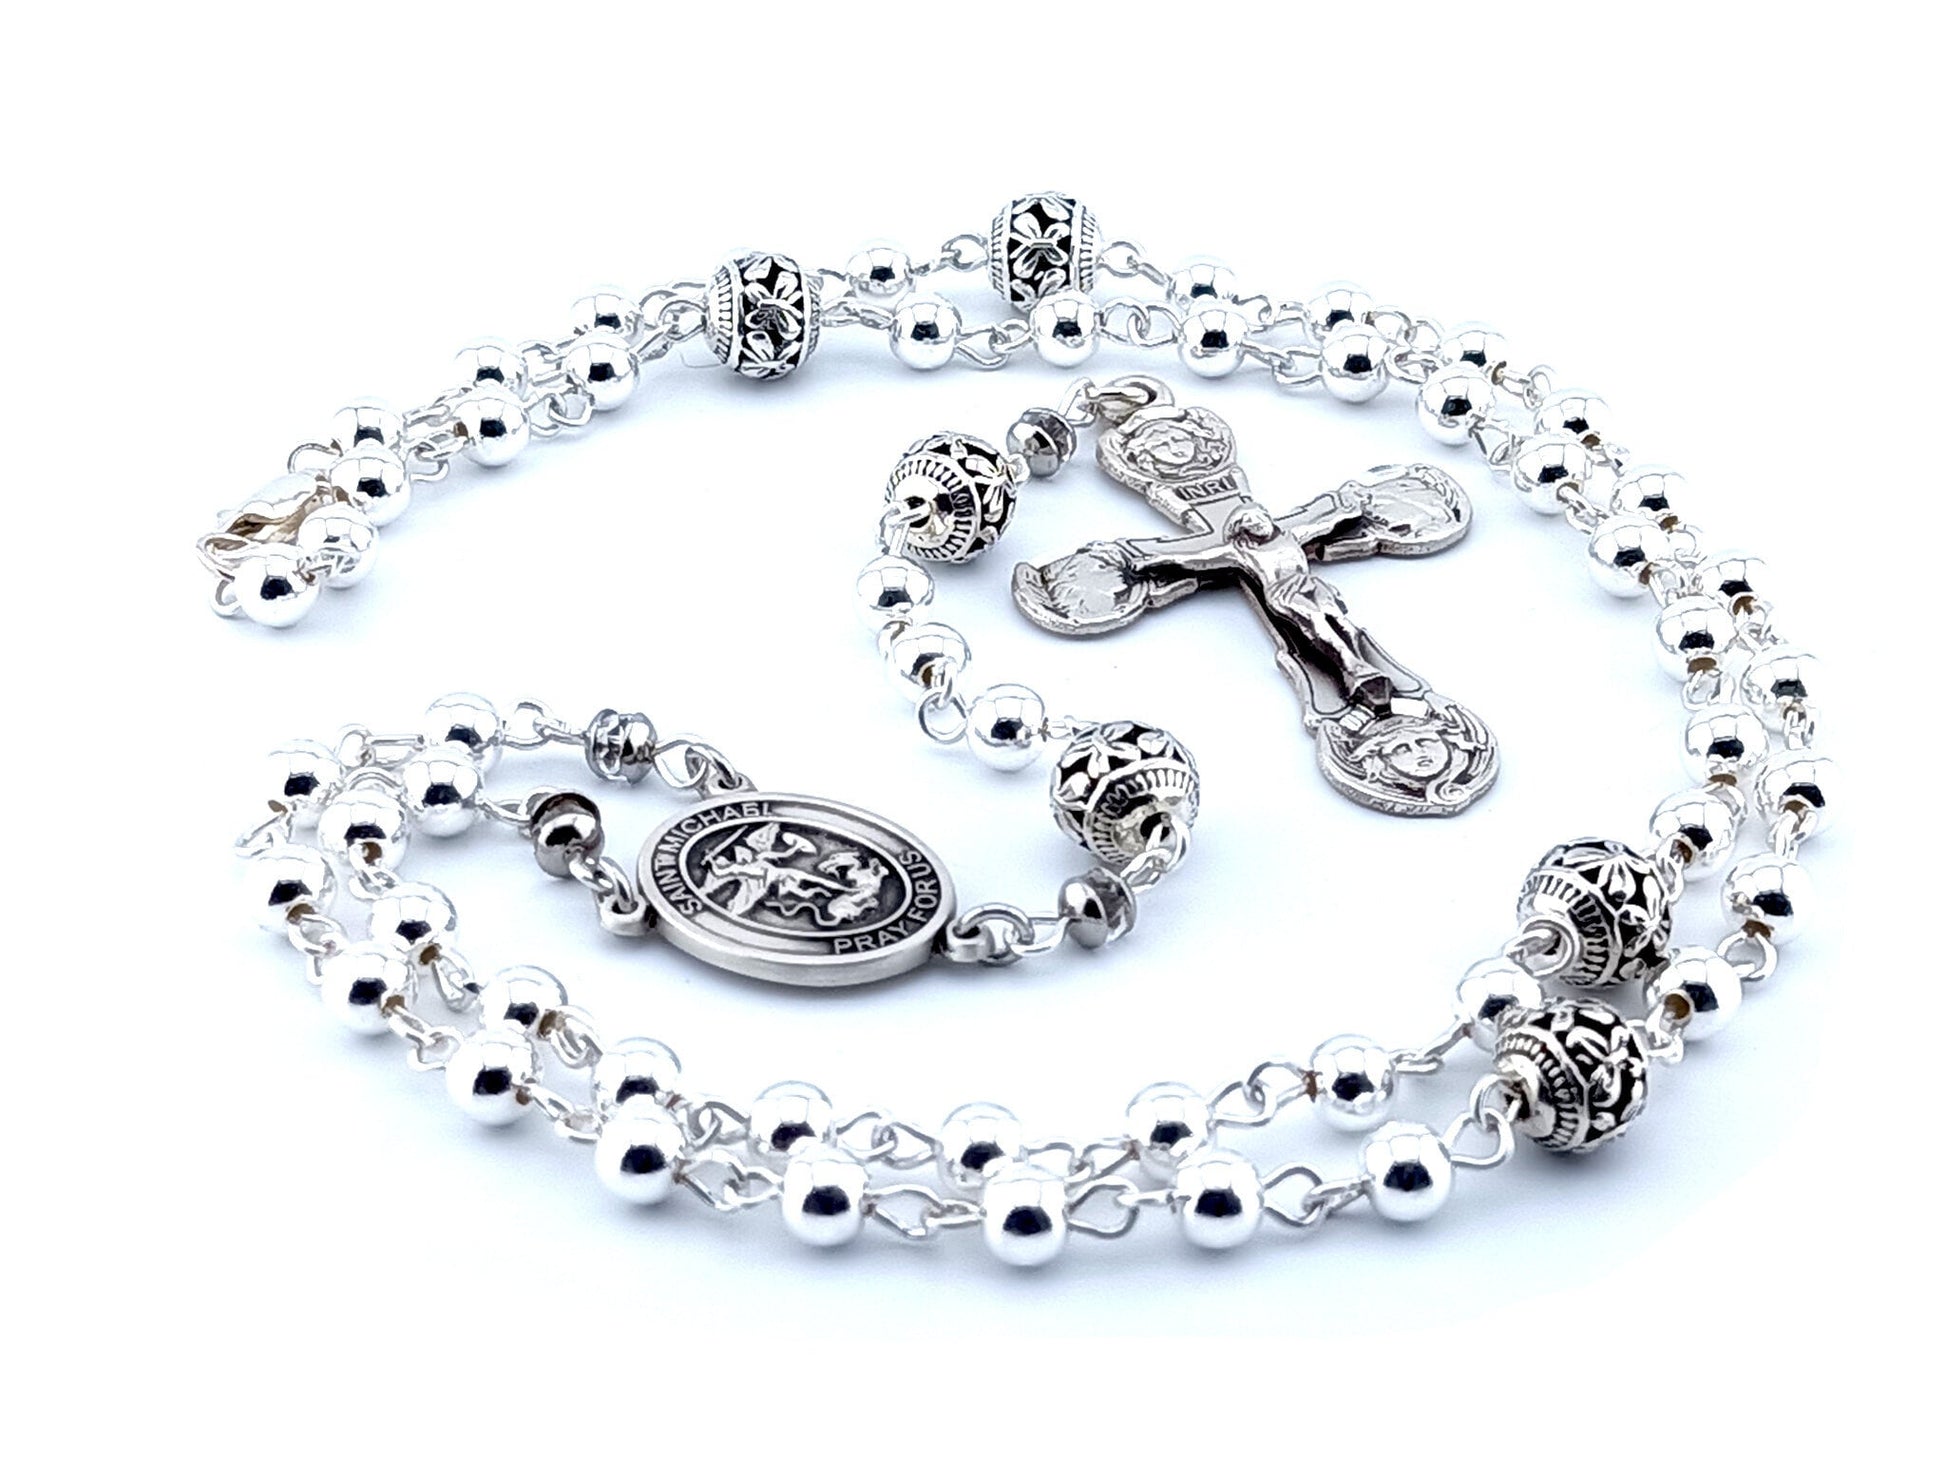 Saint Michael unique rosary beads genuine 925 sterling silver rosary with sterling silver beads, crucifix, centre medal and wire.